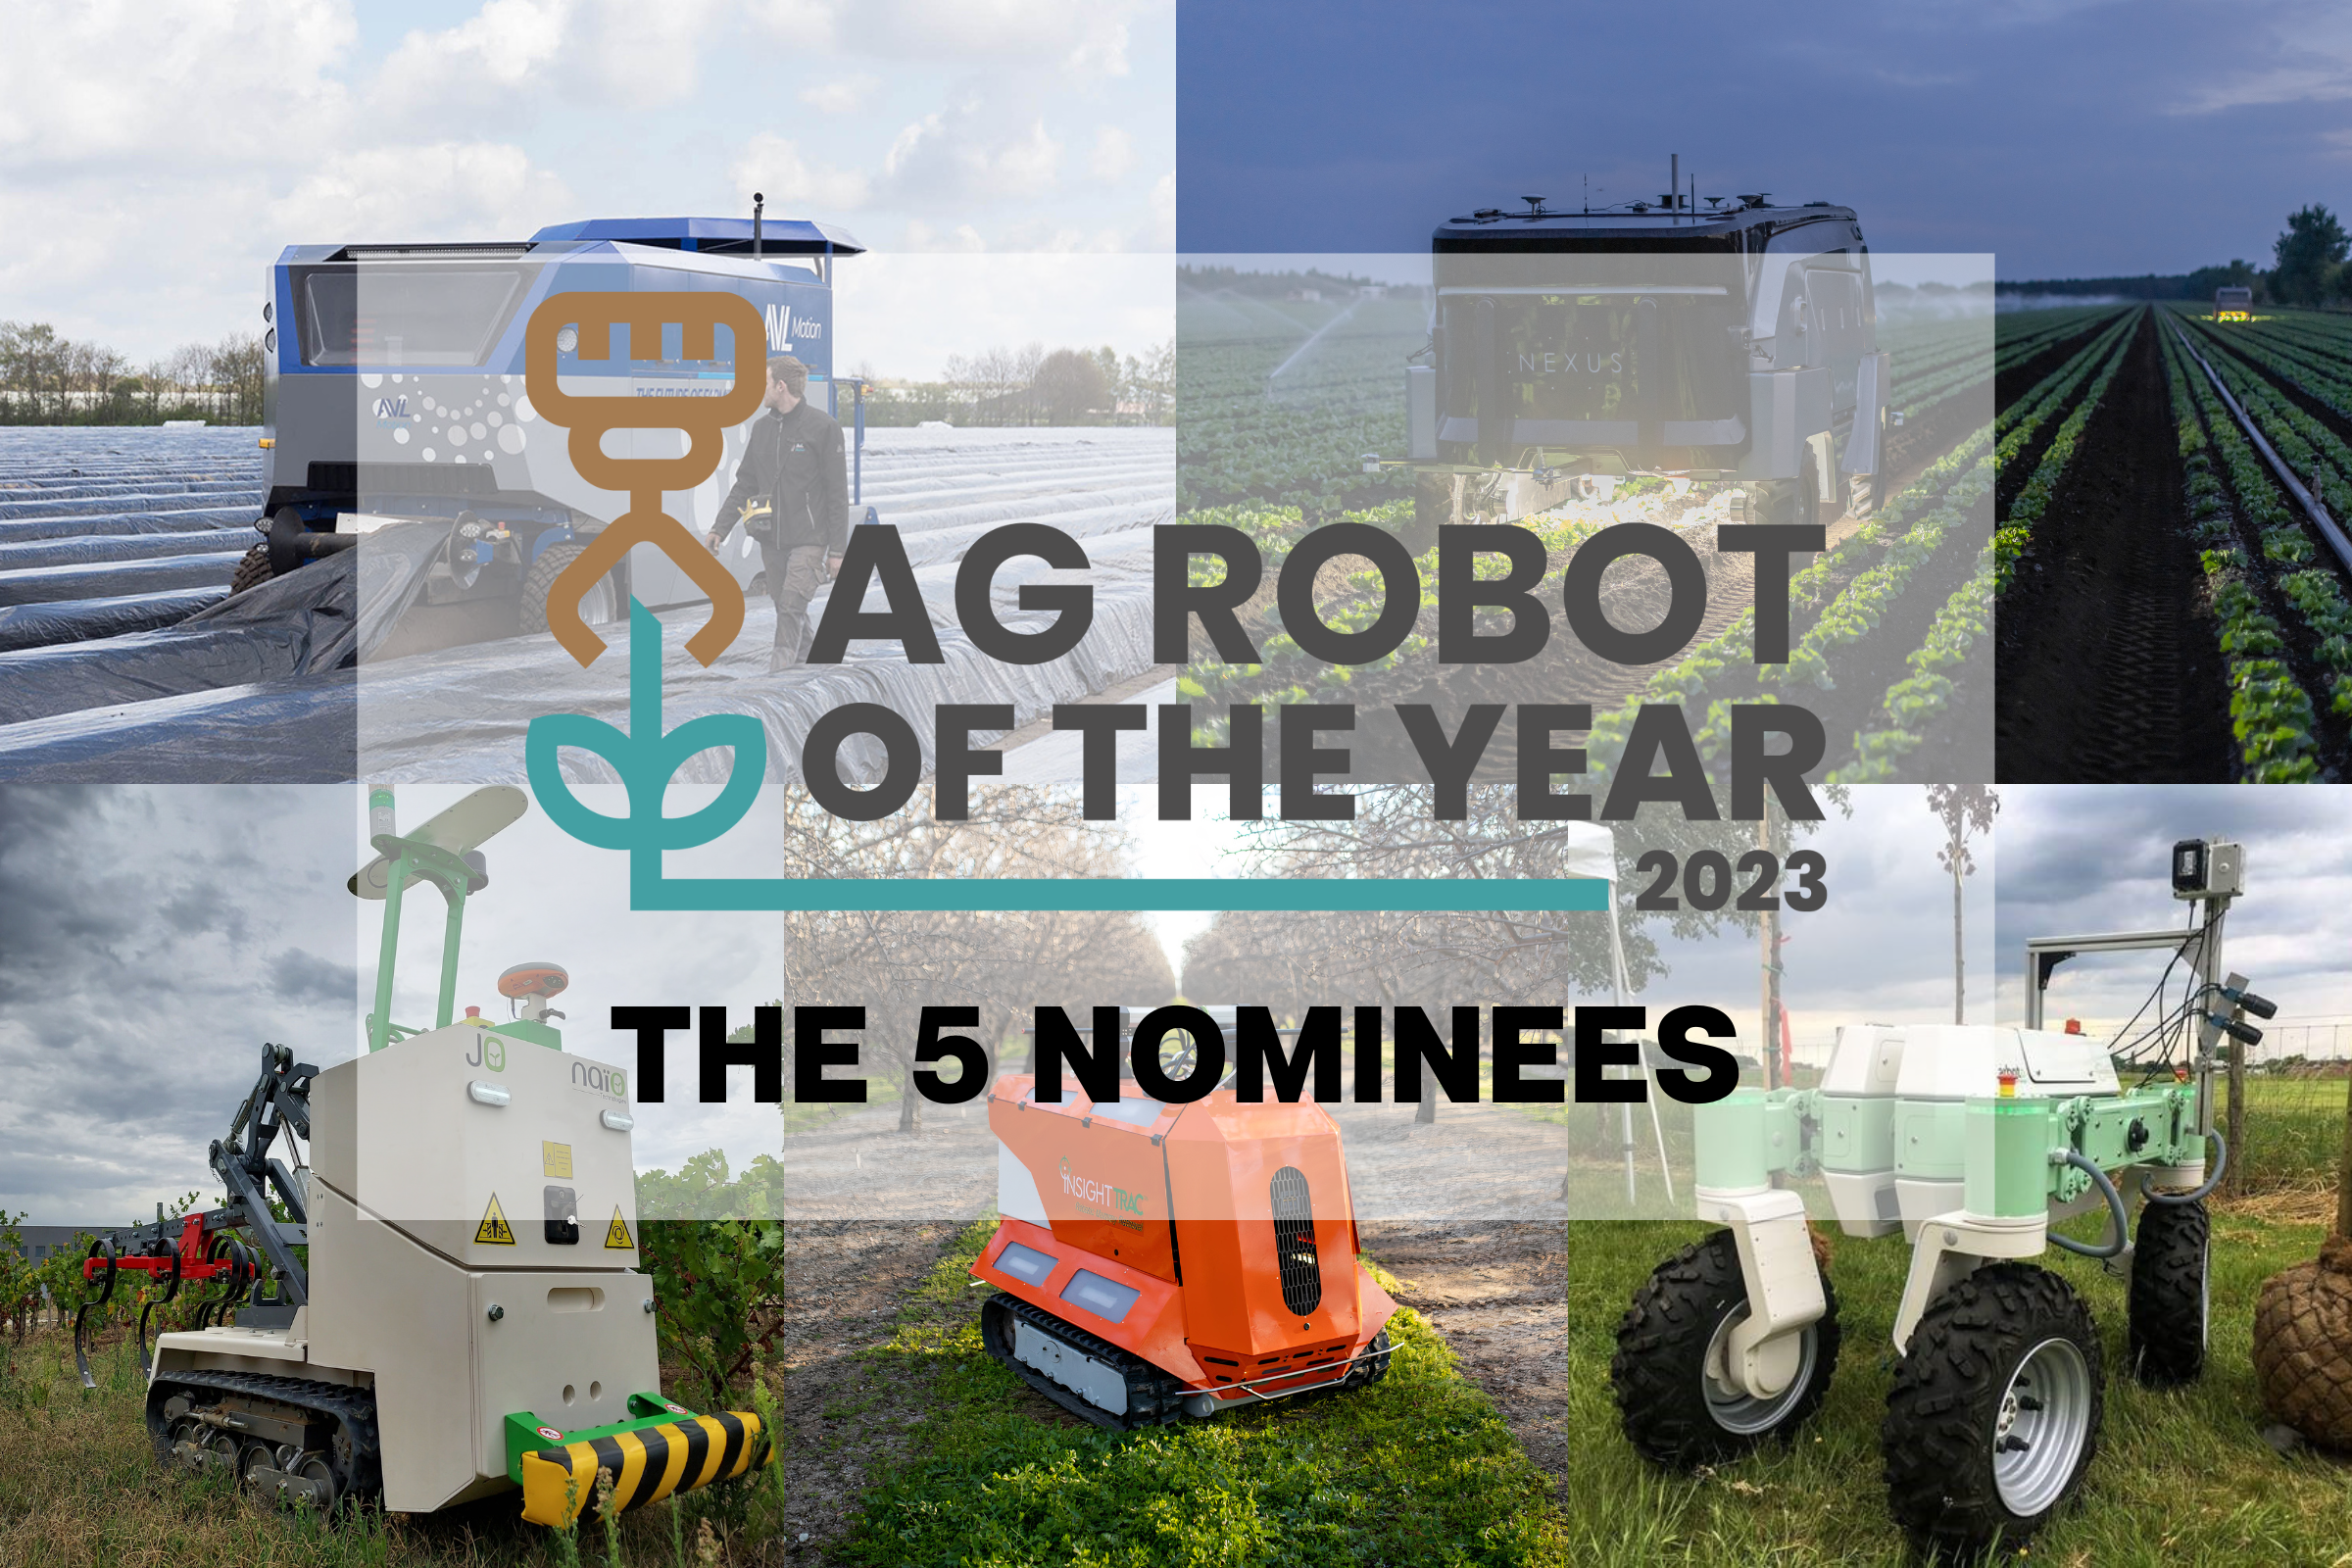 AvL Motion, Exobotic, InsightTRAC, Naïo and Nexus finalists for Ag Robot of the Year 2023 - Future Farming